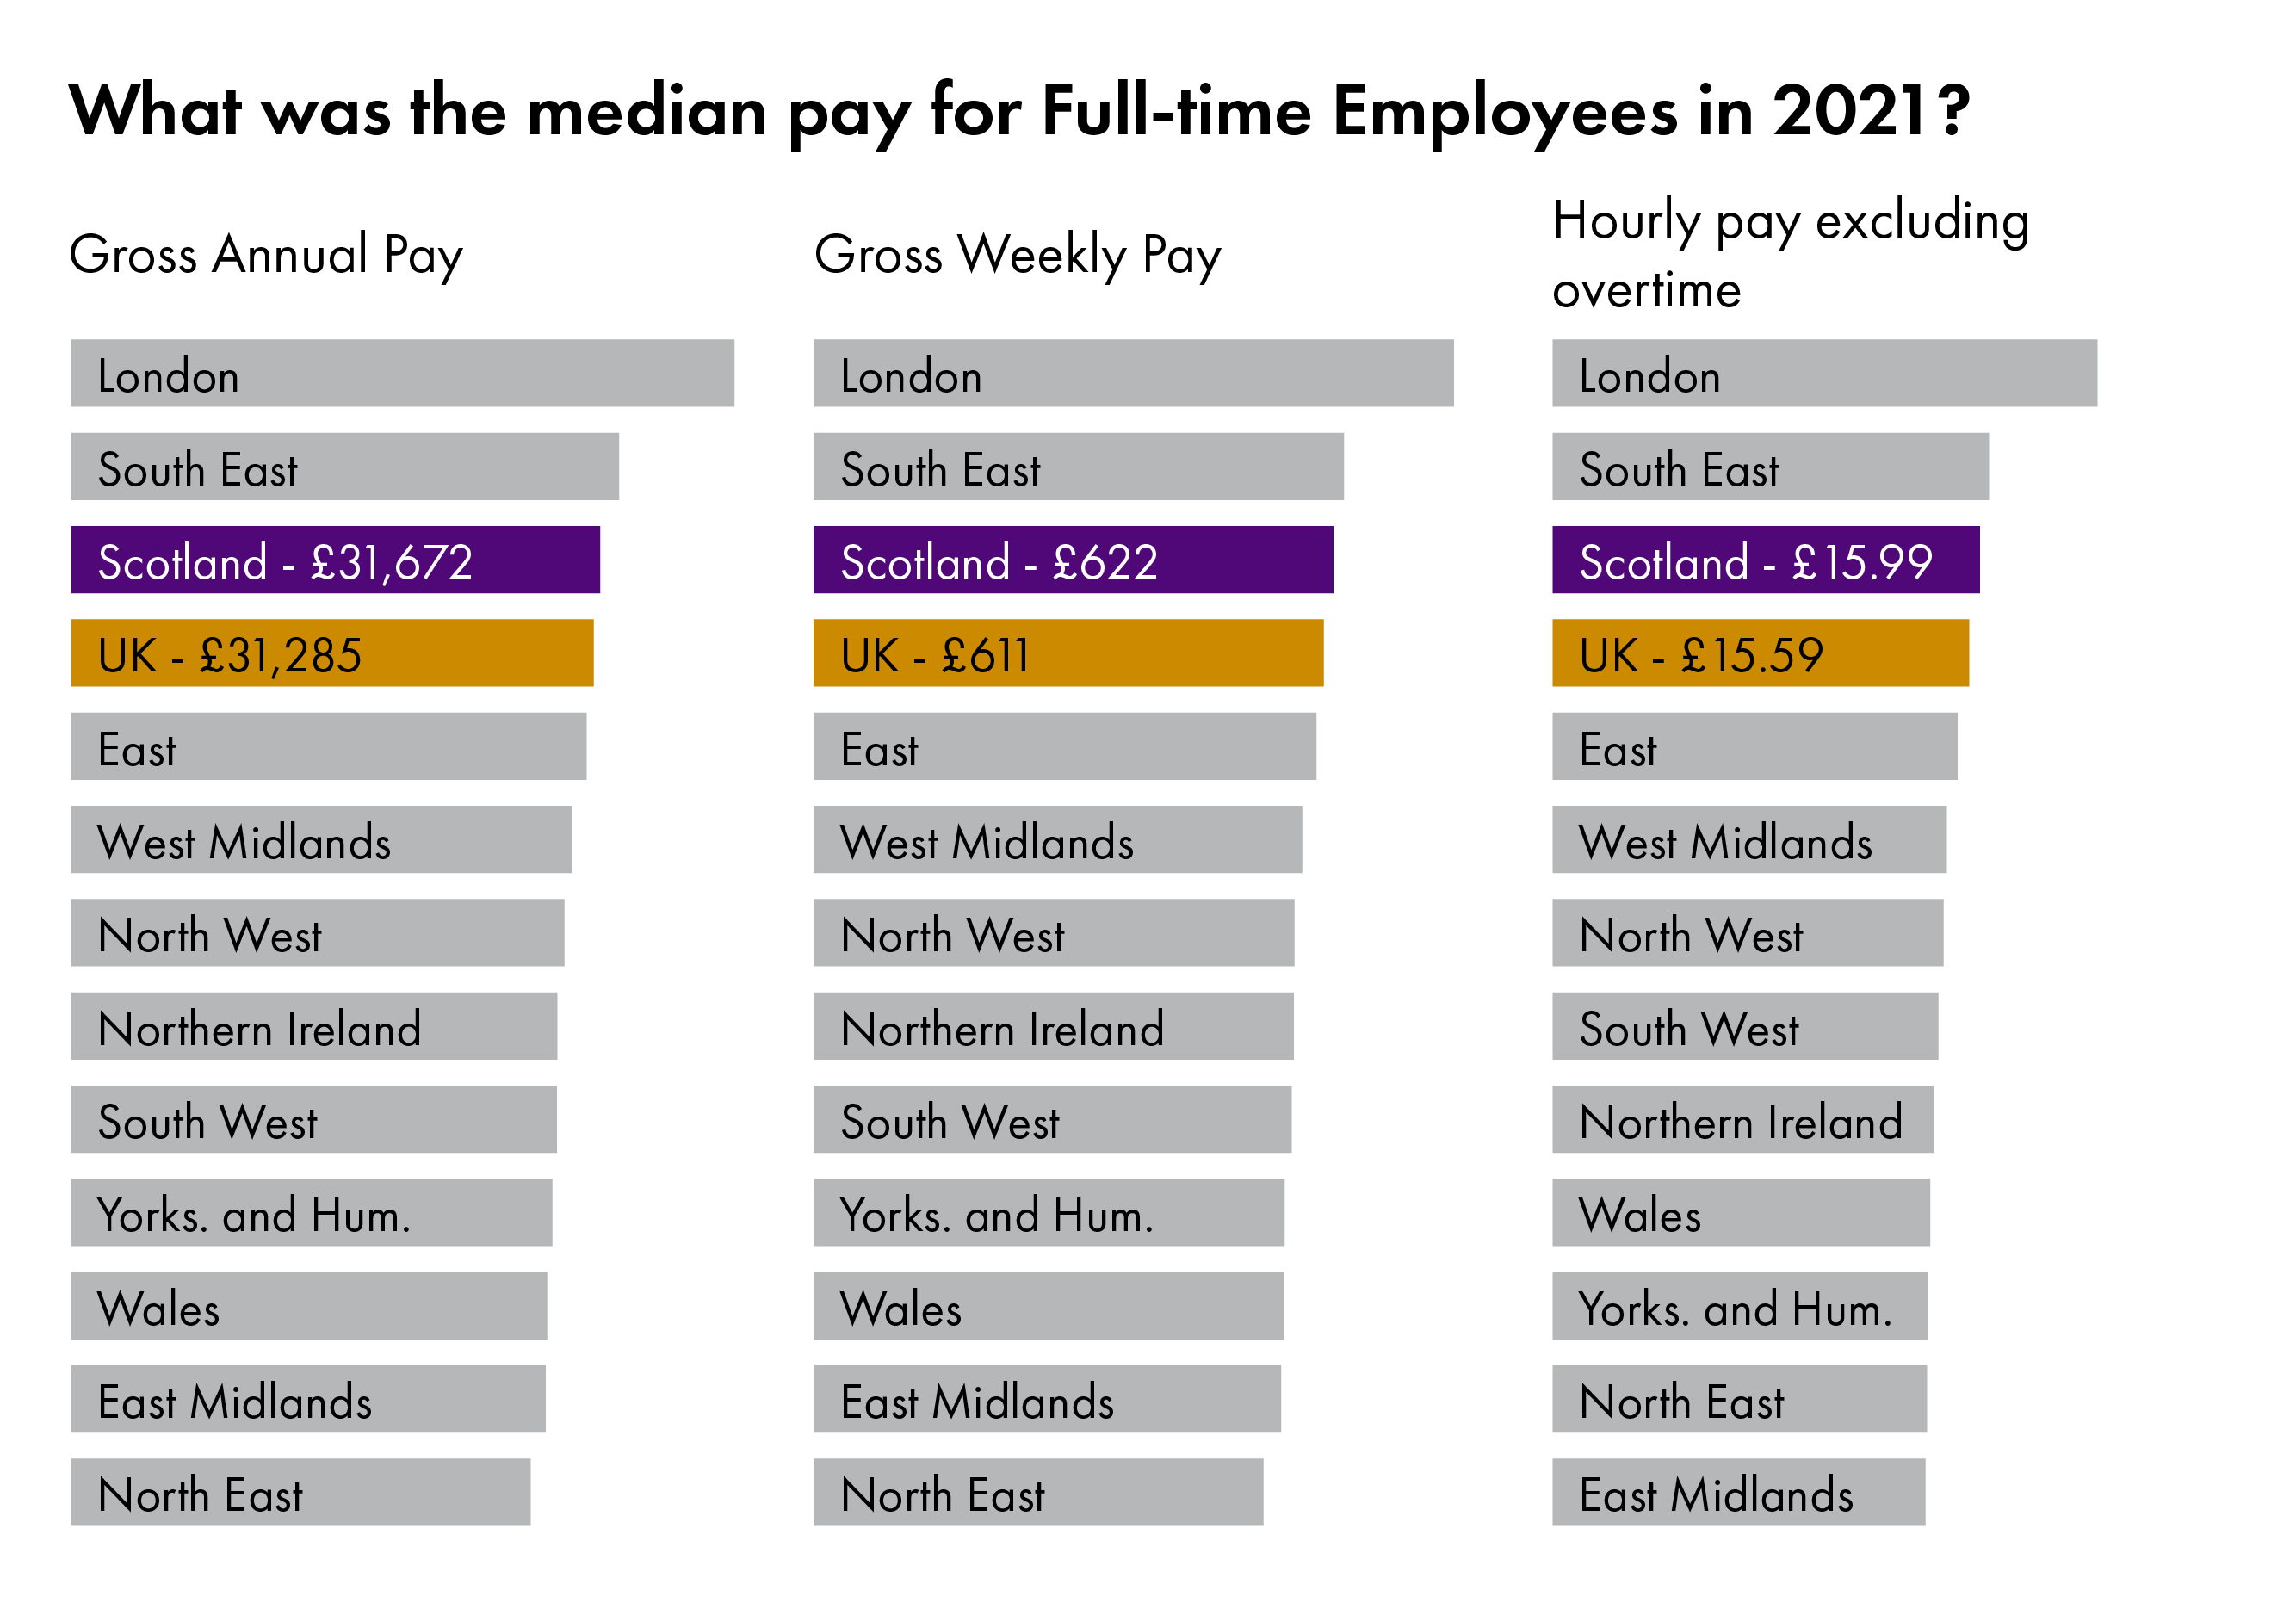 Three horizontal bar charts showing the value of pay for full-time employees by nation and region of the UK. One for gross annual pay, one for gross weekly pay and one for hourly pay excluding overtime. More detail can be found in the text below.